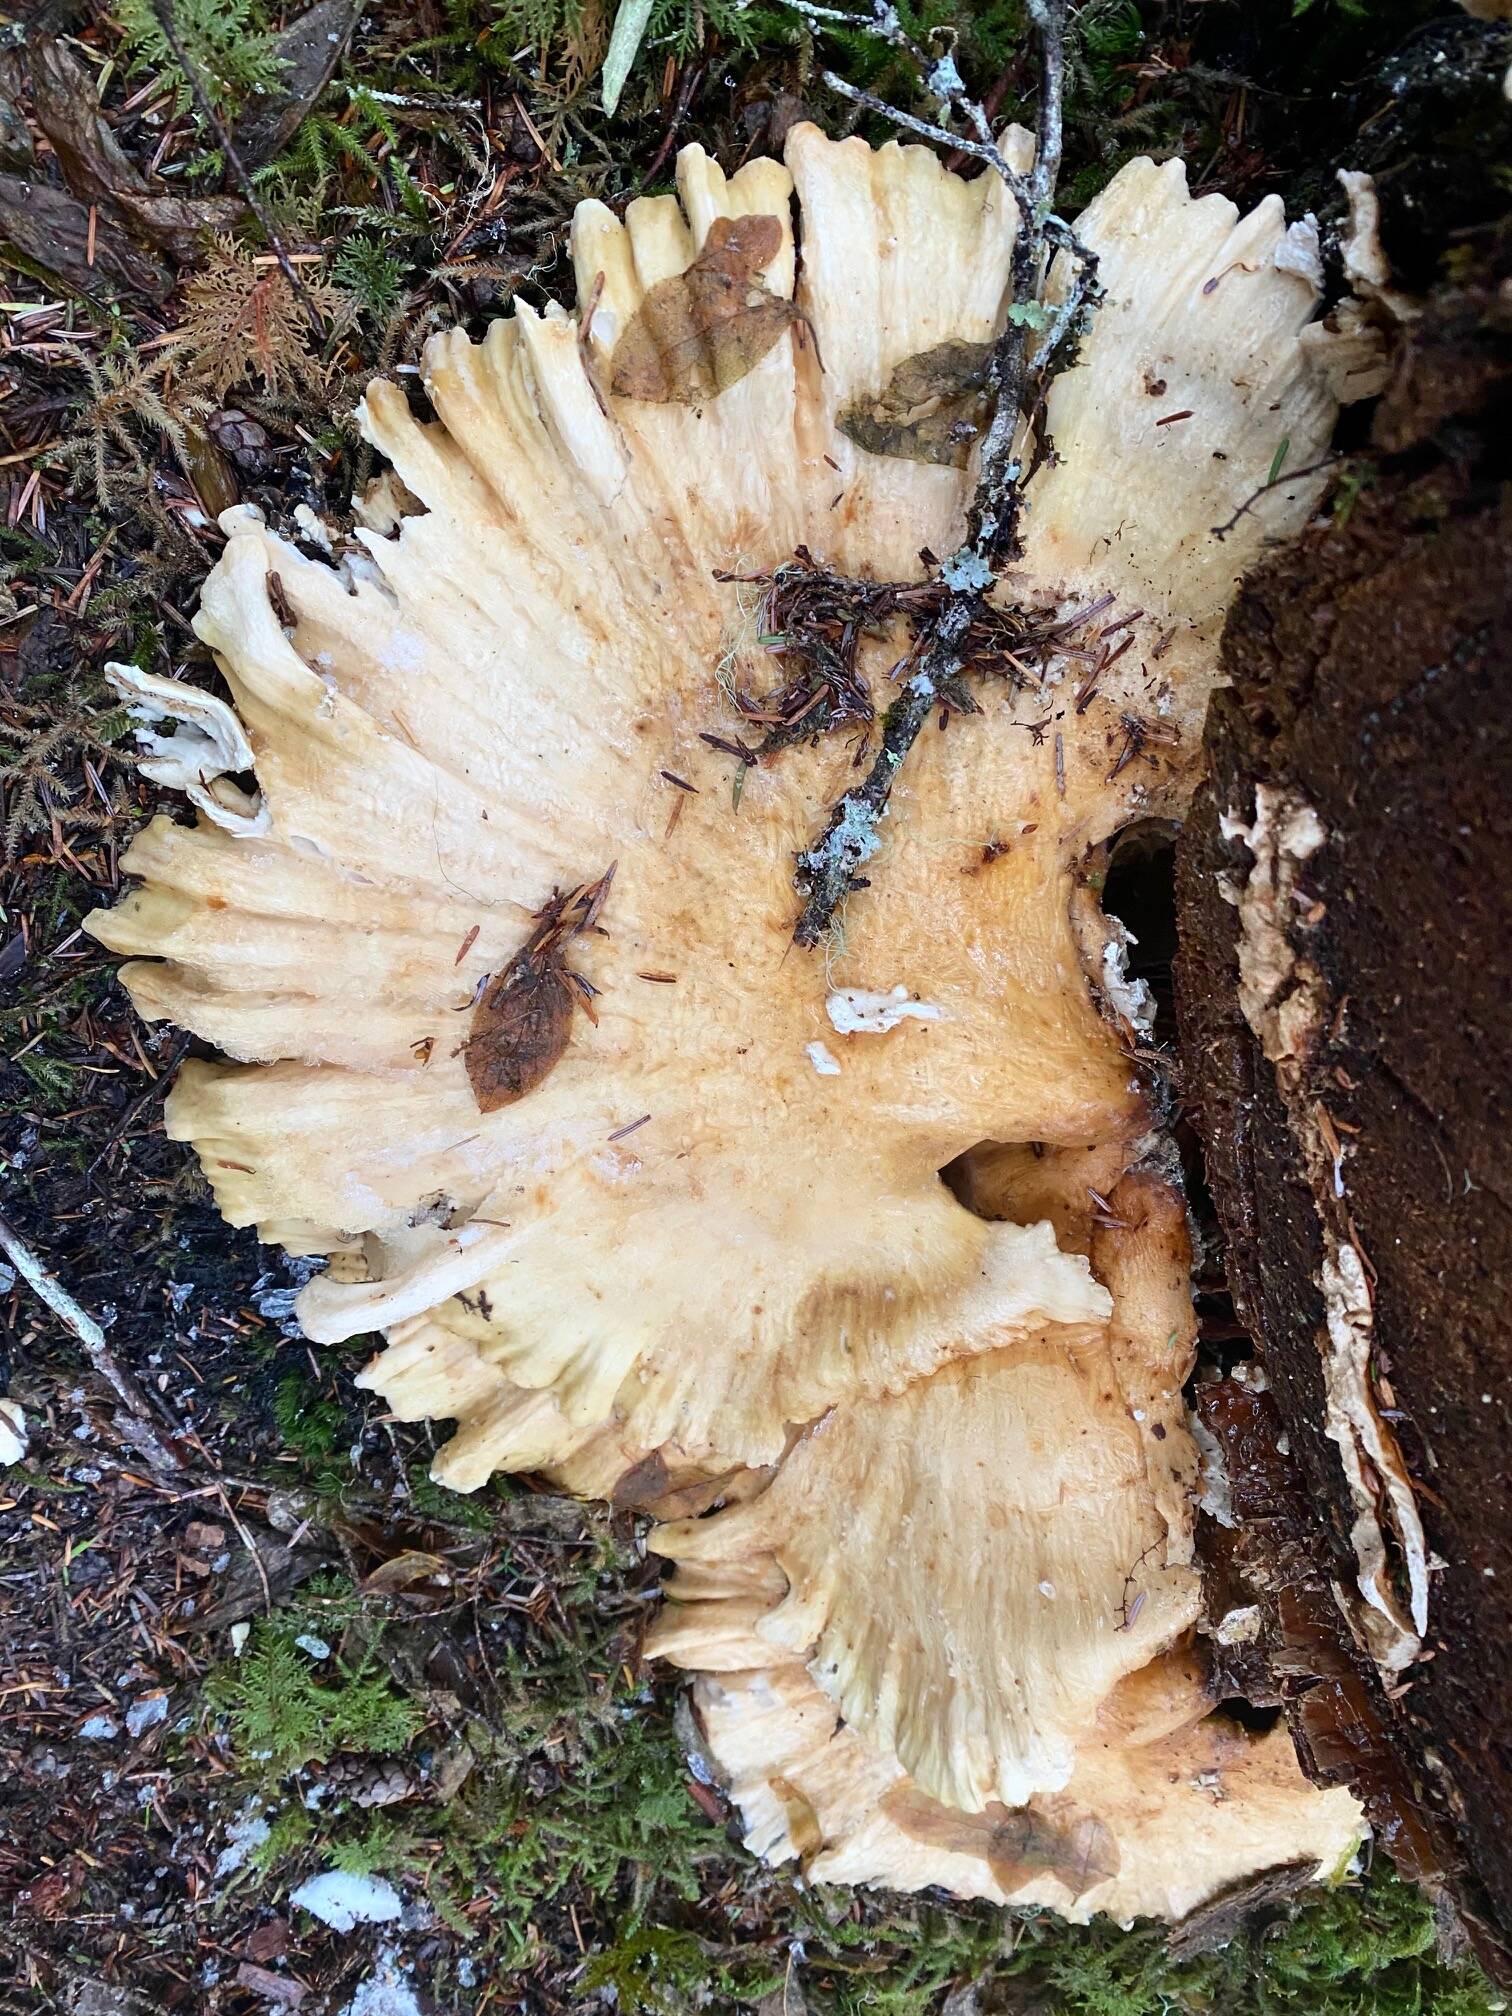 One dinner-plate sized mushroom spread out like a fan on the Bluff Trail in North Douglas. (Photo by Denise Carroll)